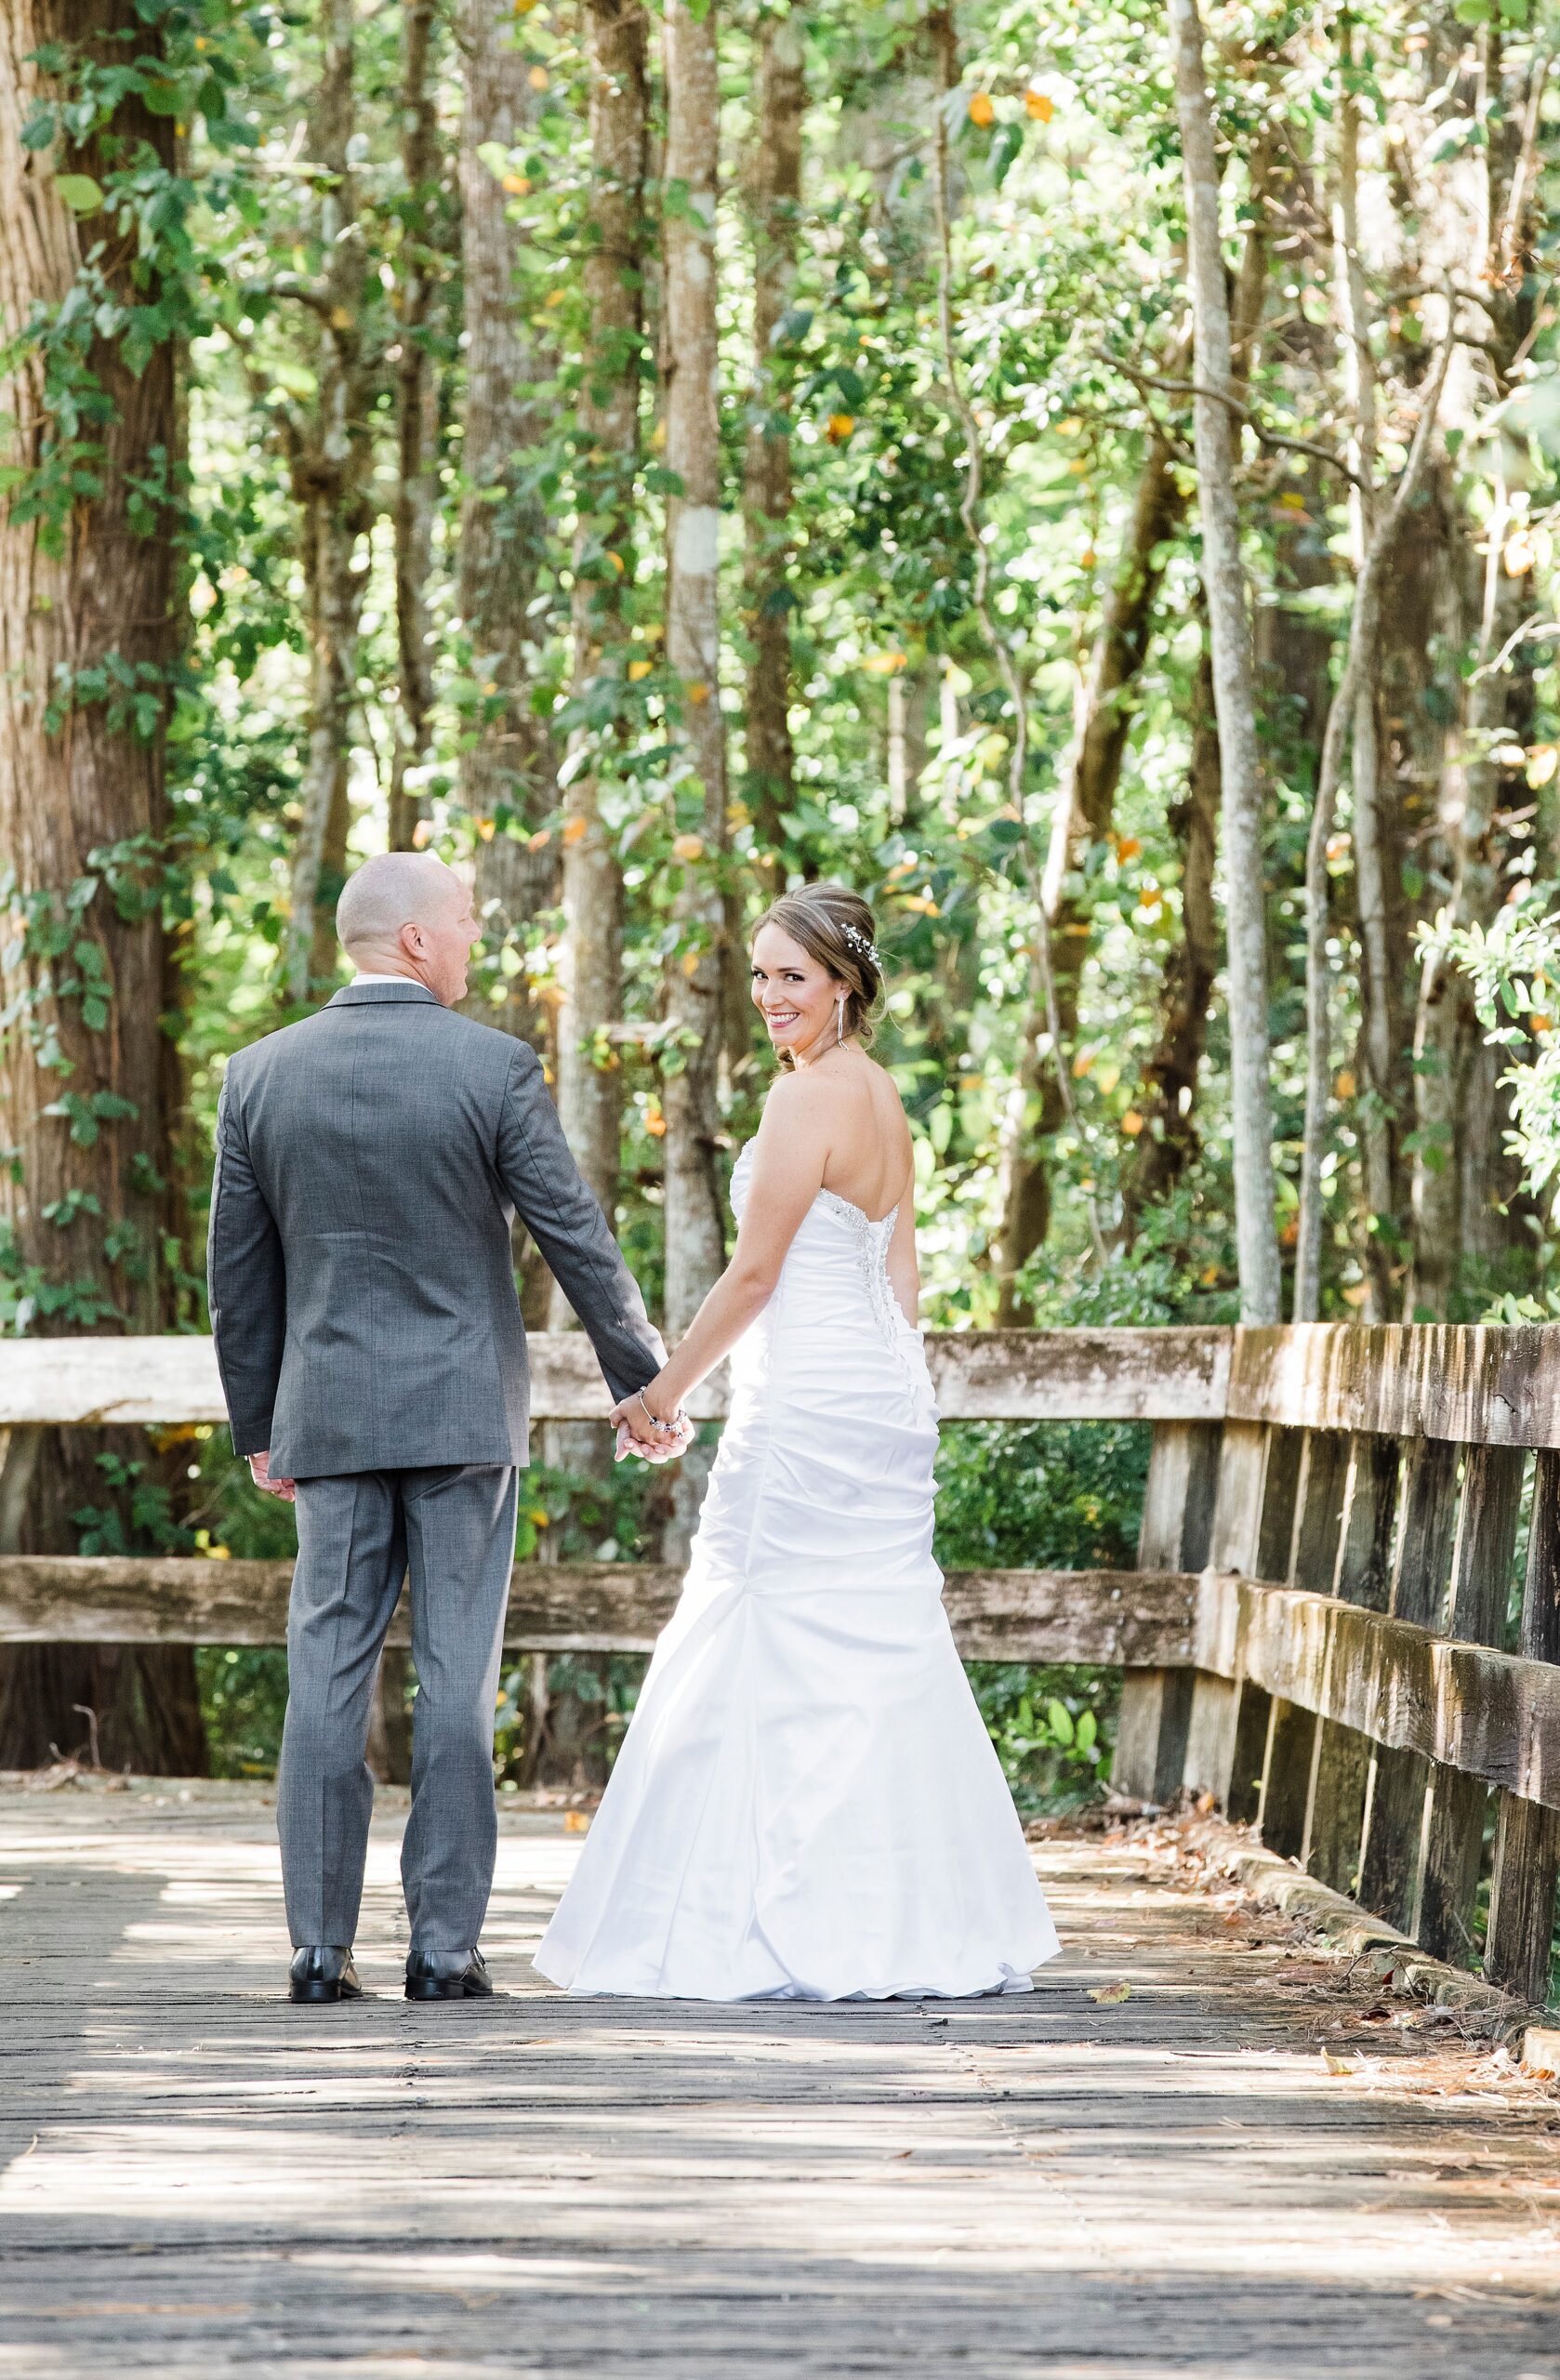 A bride stands on a boardwalk looking over her shoulder while holding hands with her husband